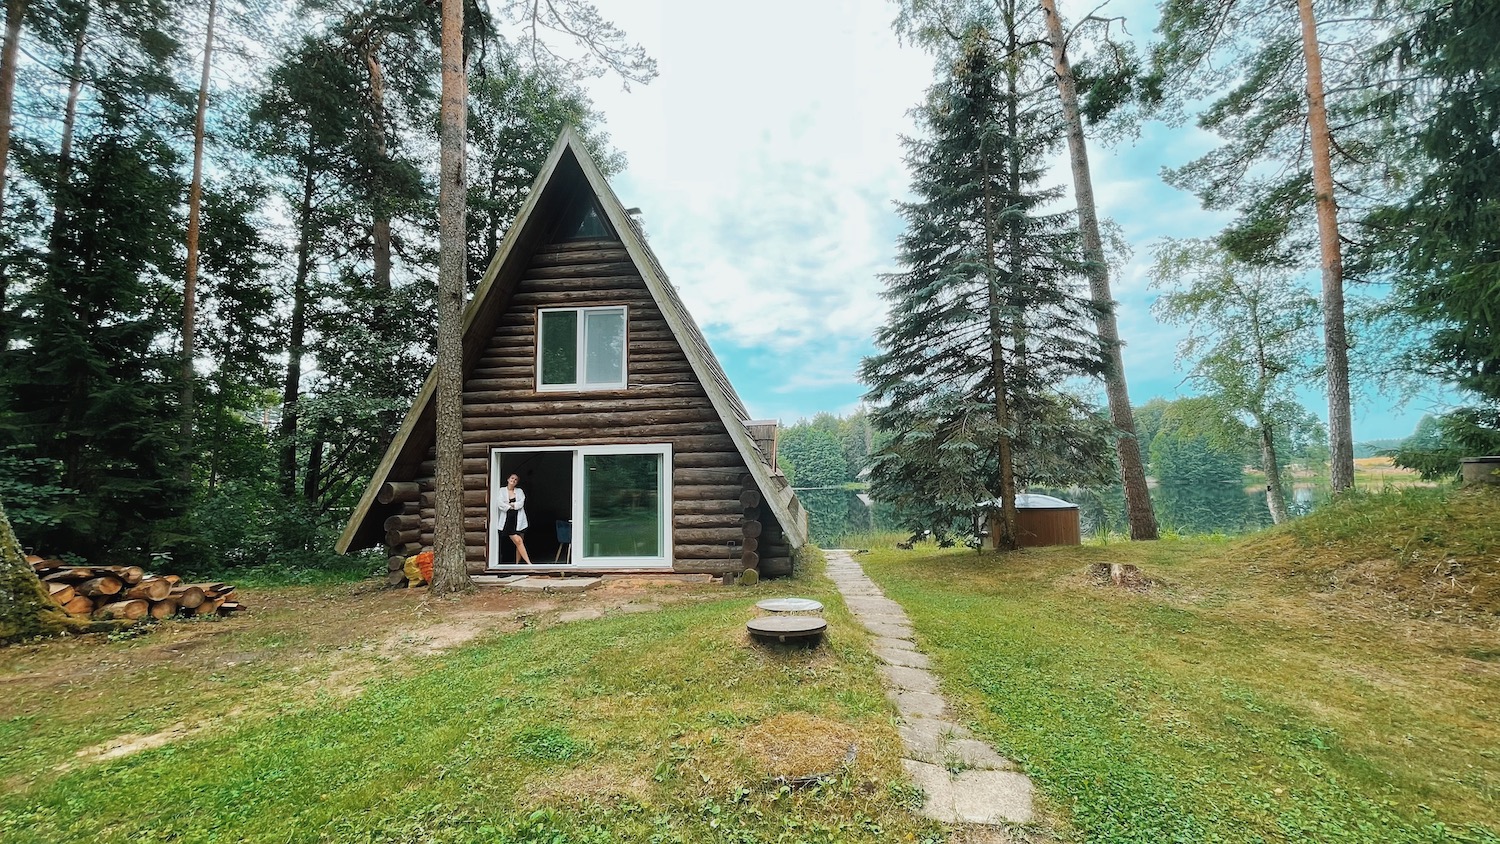 Visit Estonian holiday cabins in the middle of the nature